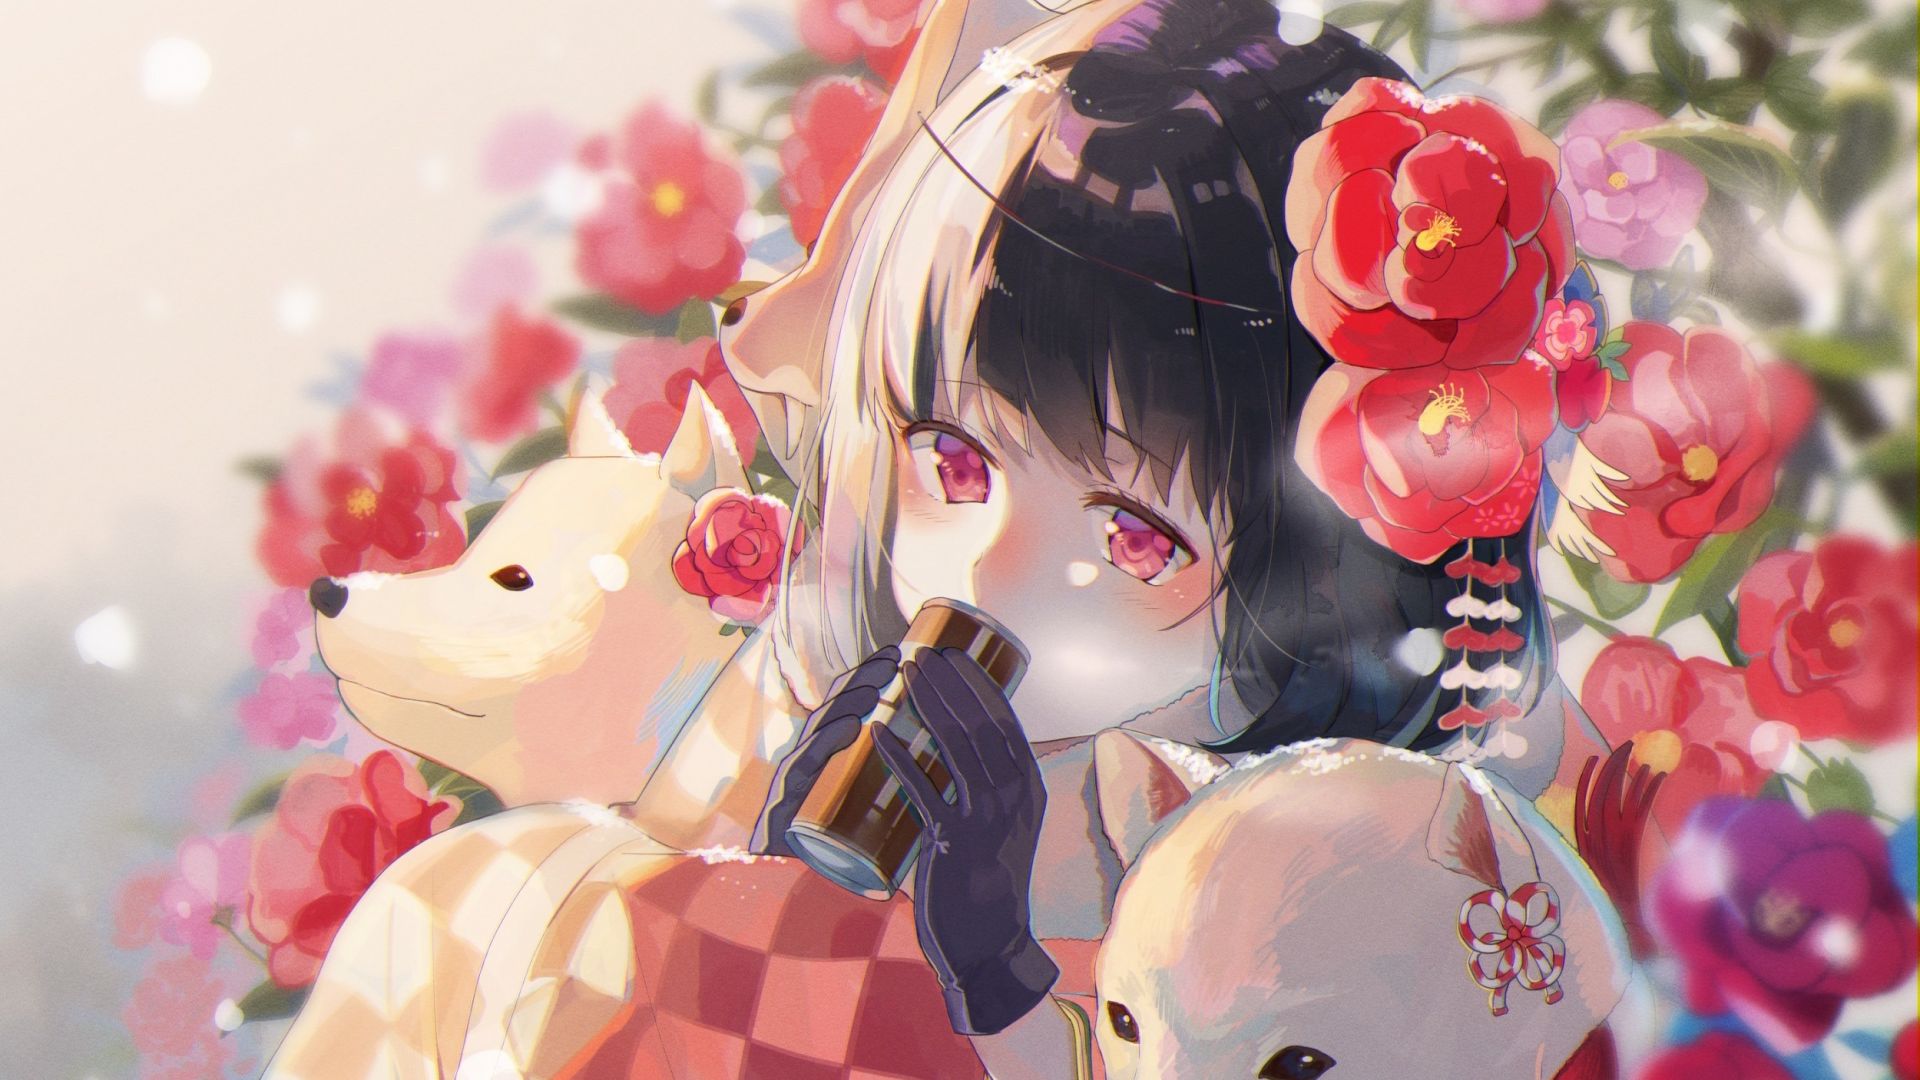 Desktop Wallpaper Dogs And Flowers, Anime Girl, Cute, Original, HD Image, Picture, Background, 35970c